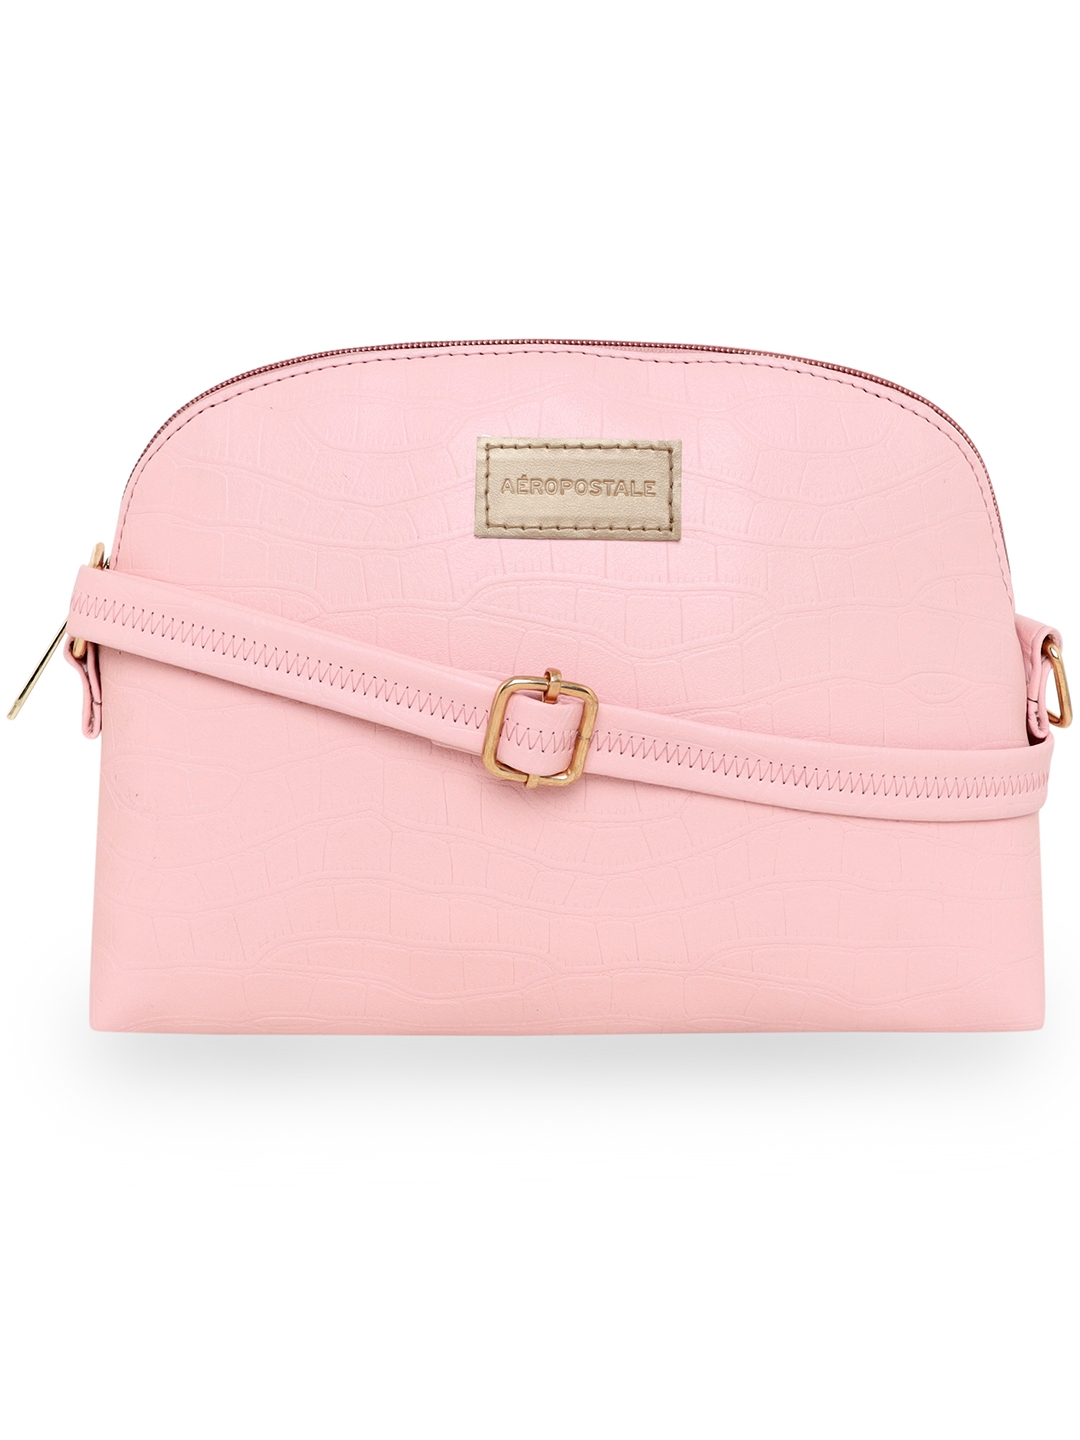 Aeropostale Textured Kylie PU Sling Bag with non-detachable strap (Baby Pink)